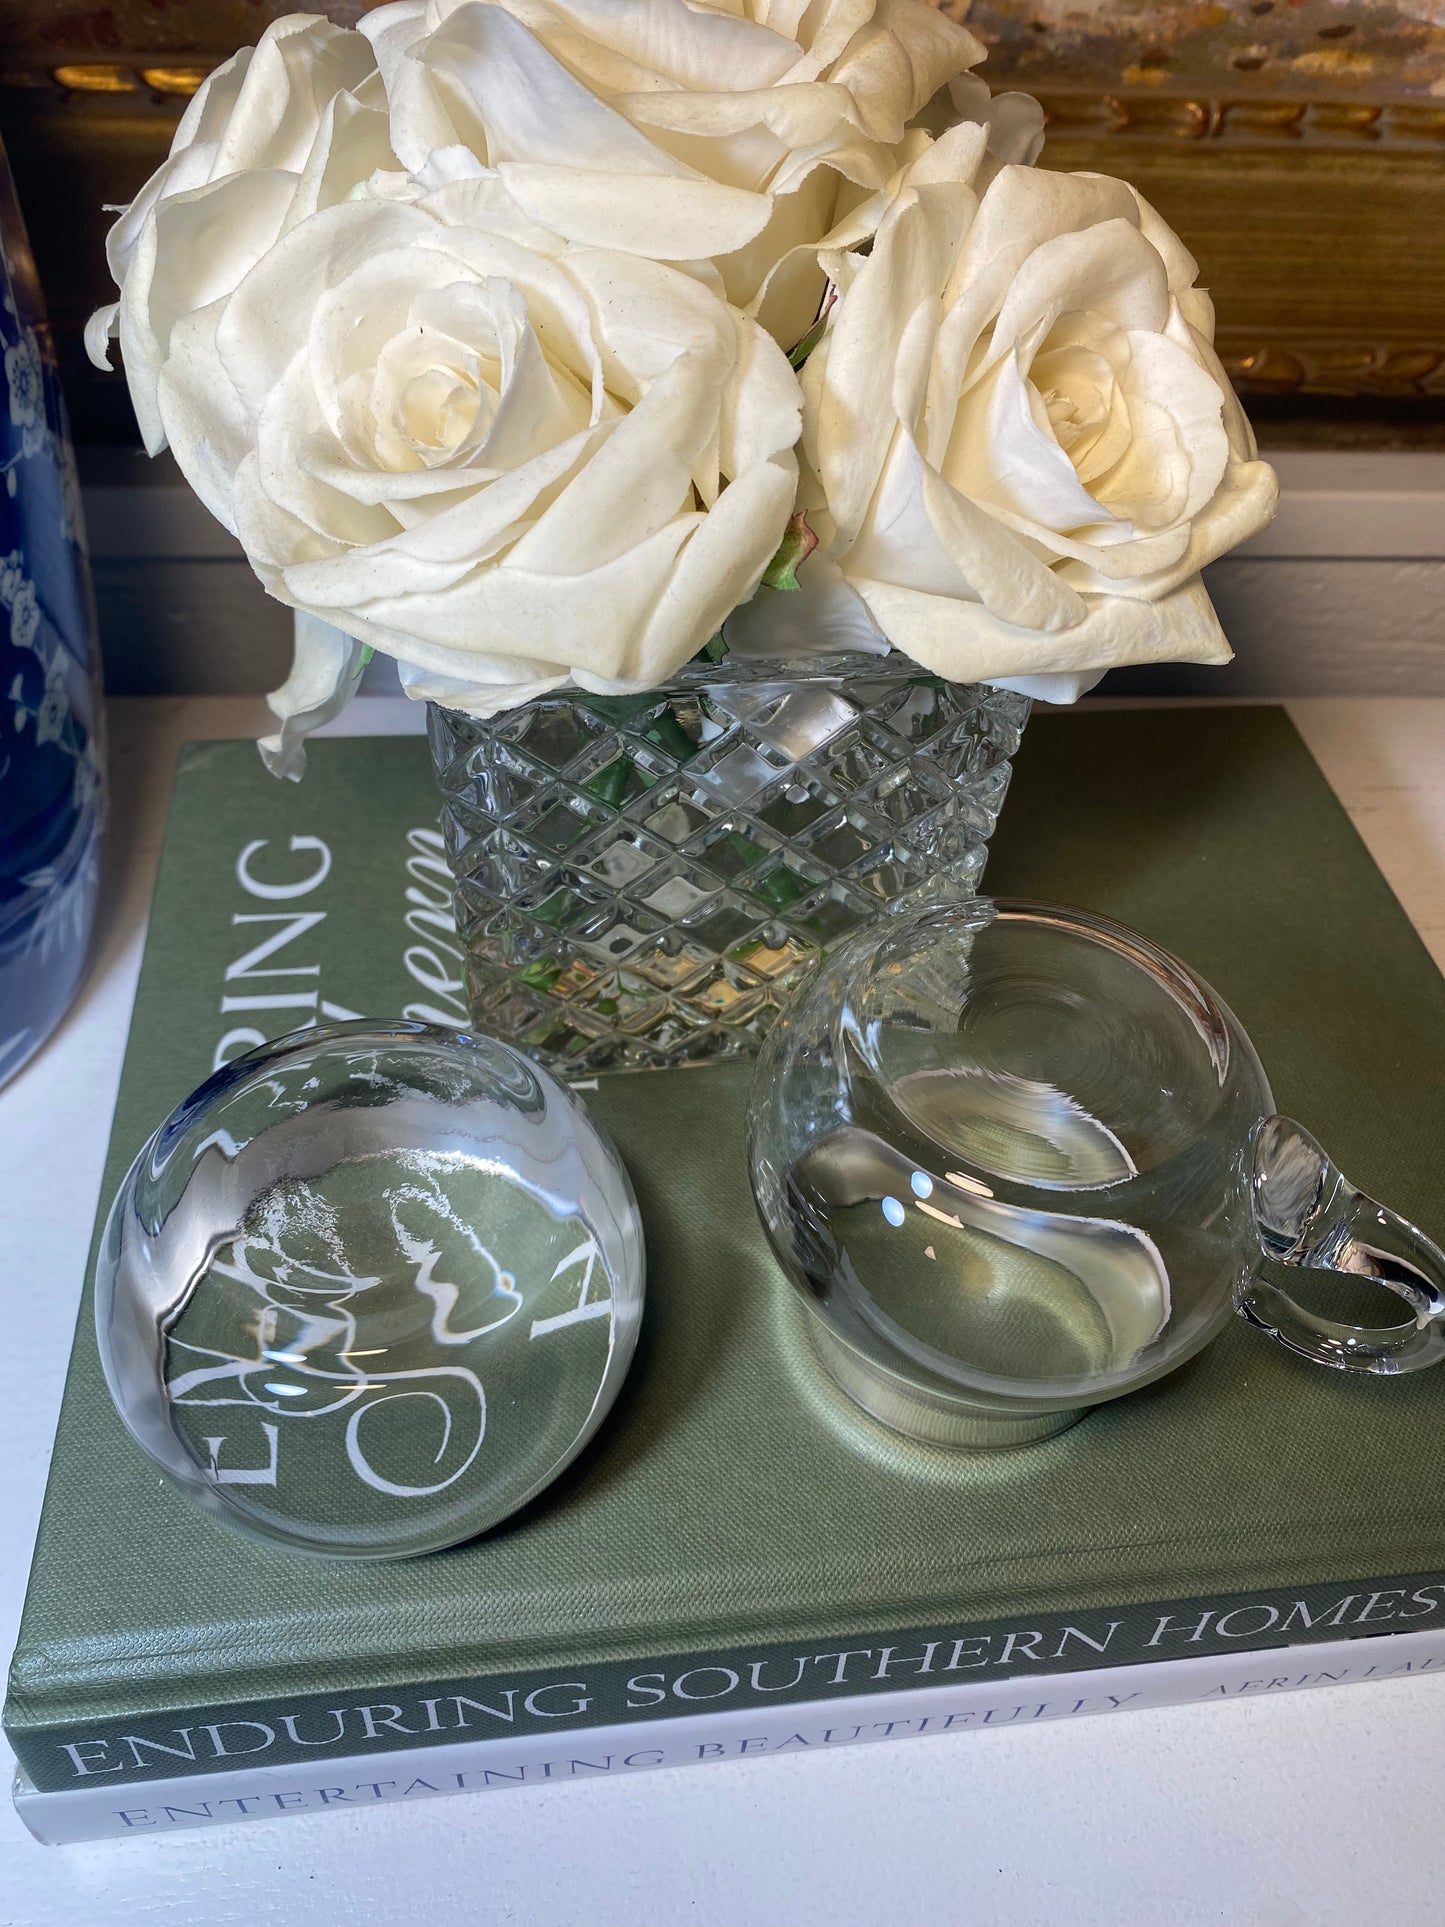 Timeless Elegance: Vintage Glass Sugar and Creamer Set with Sleek Metal Rim - Elevate Your Tea Time Experience!